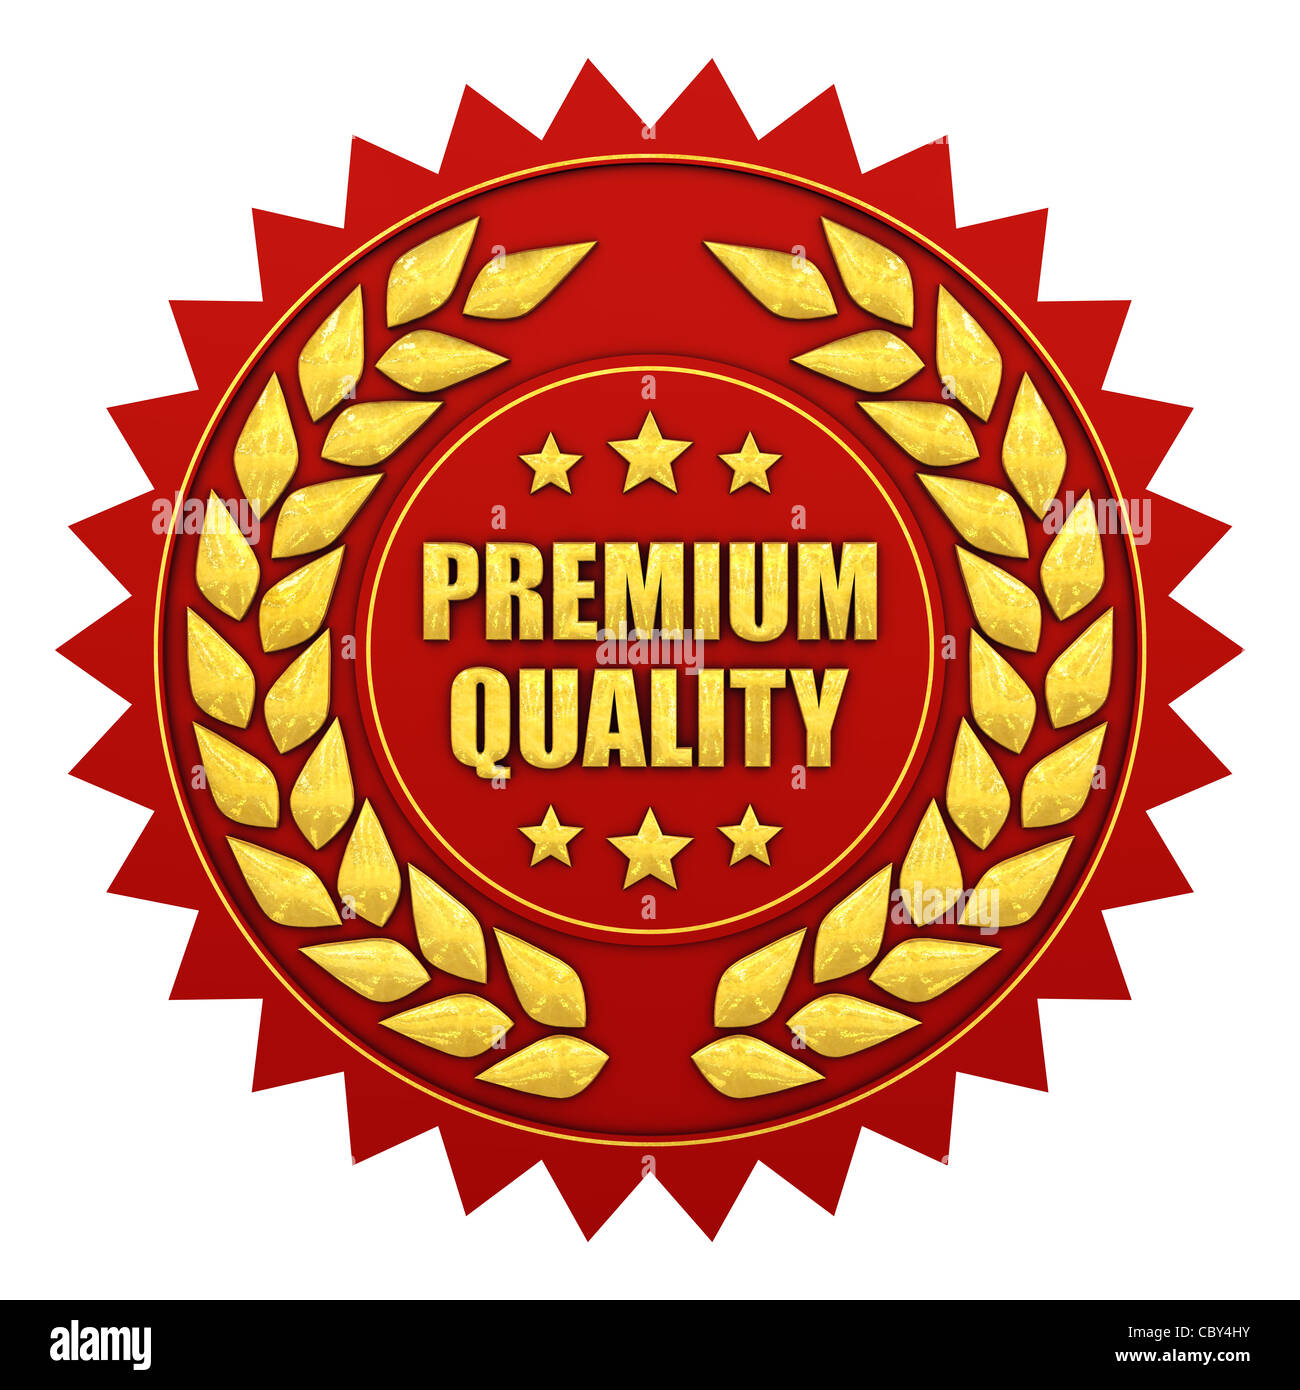 Premium quality , red and gold label , isolated on white Stock Photo